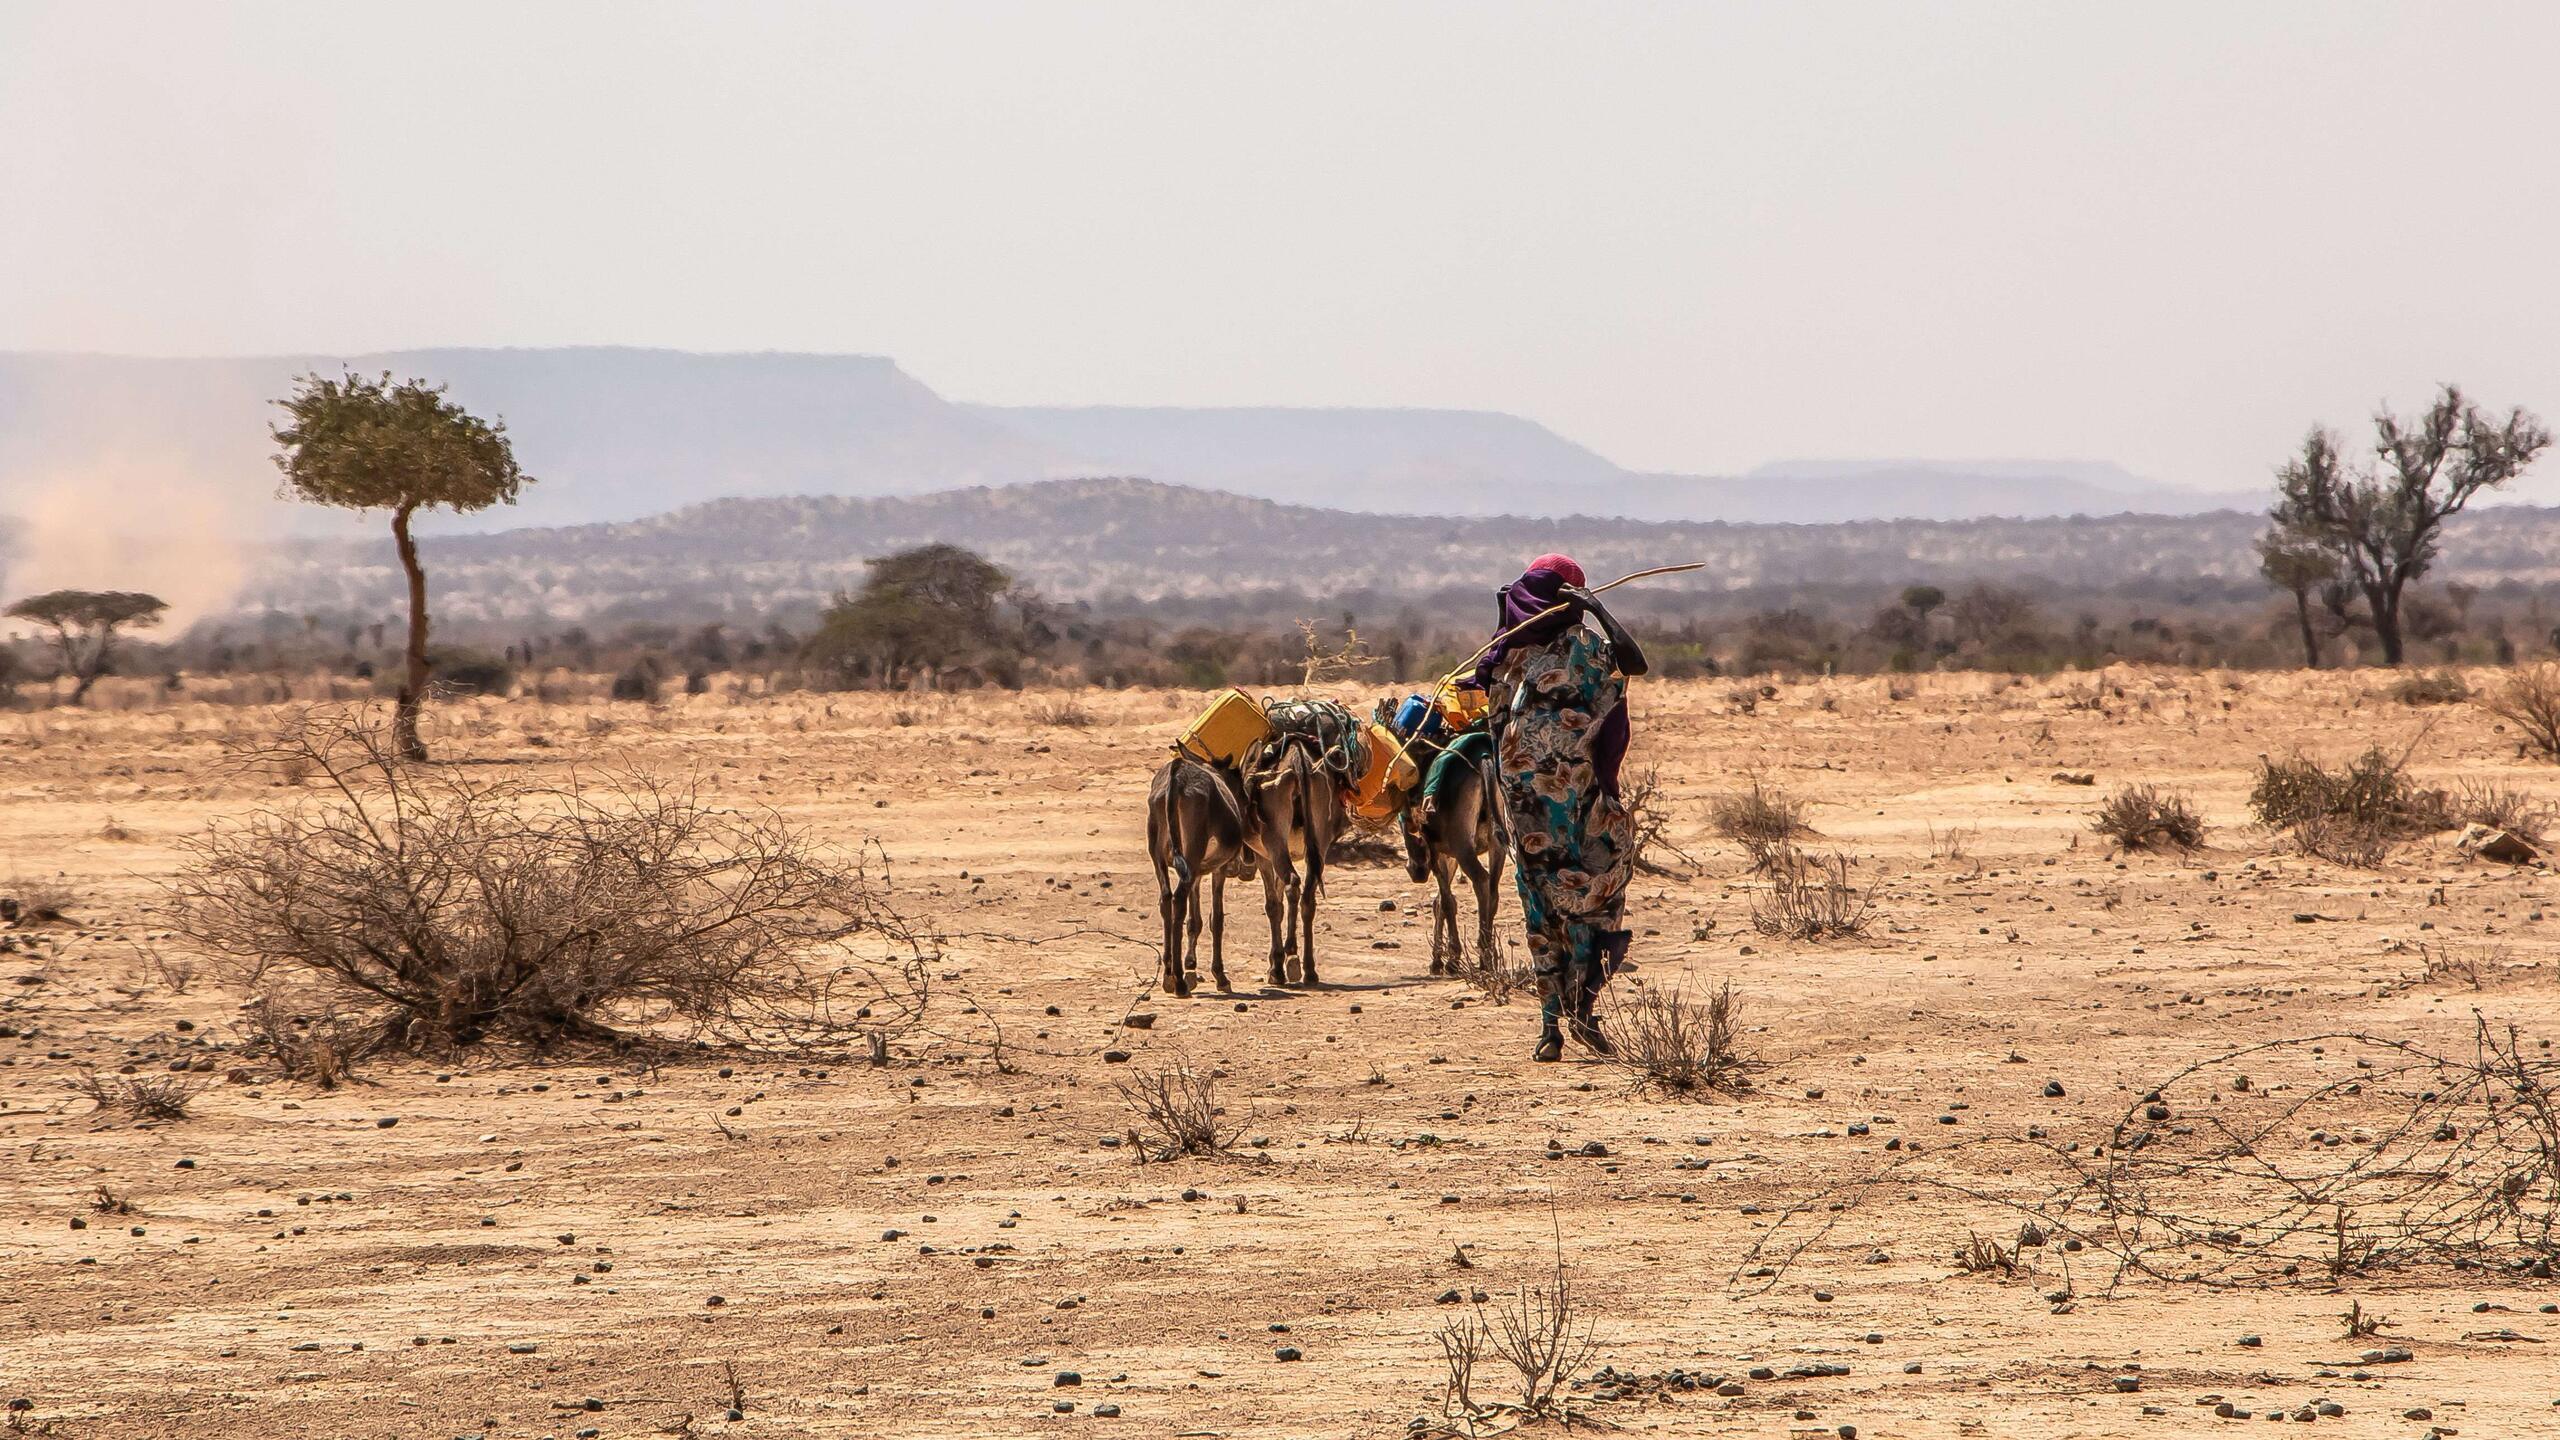 A woman walks with 3 animals.